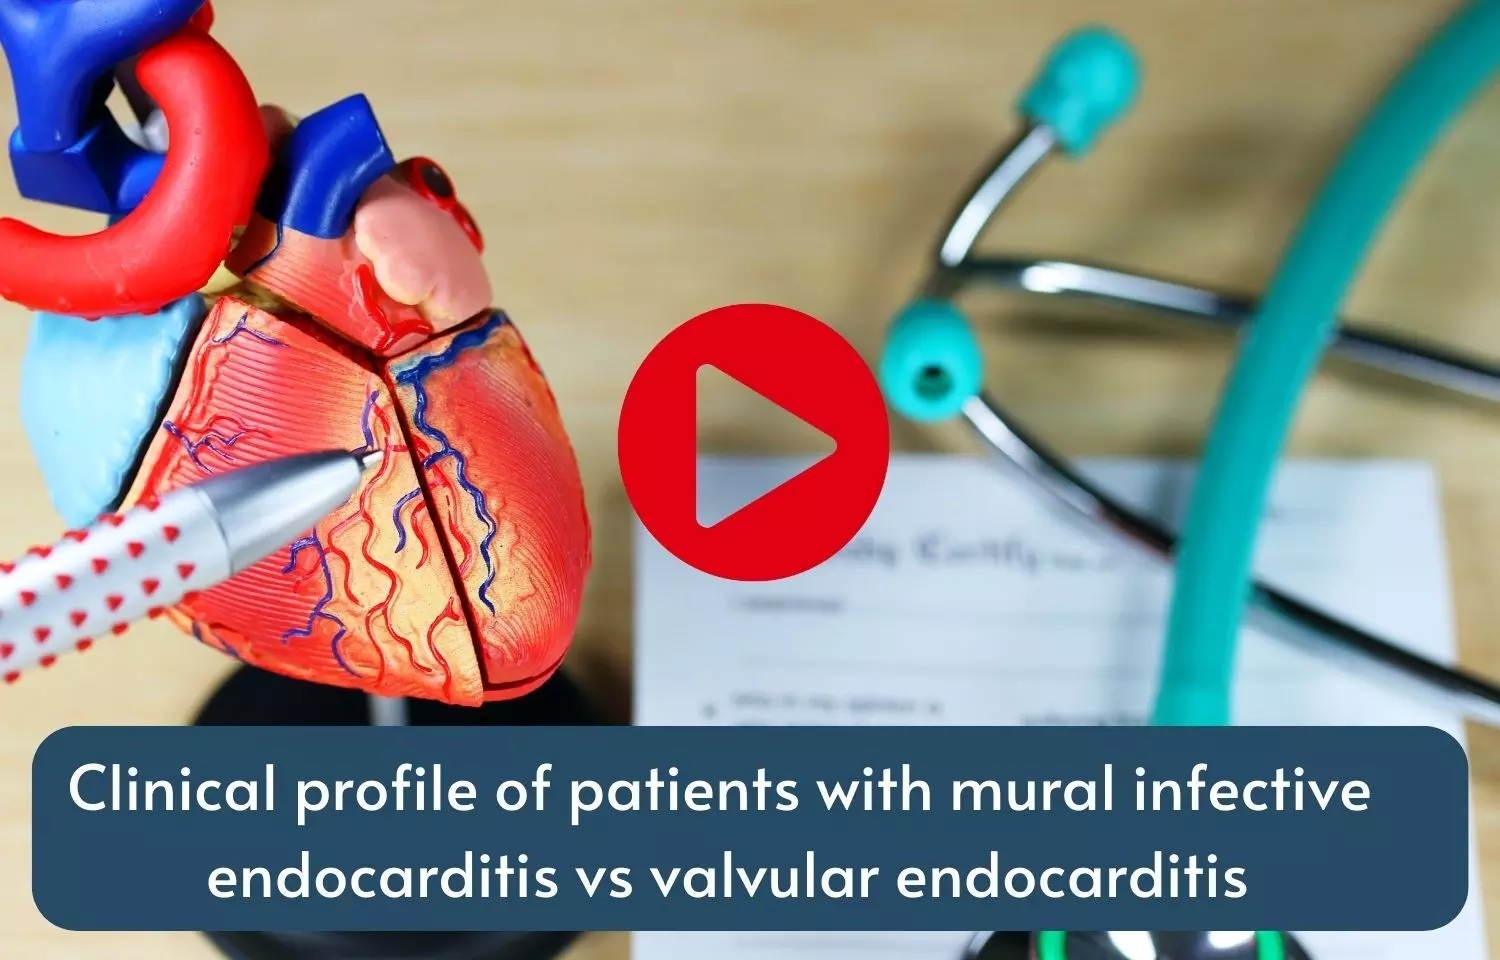 Clinical profile of patients with mural infective endocarditis vs valvular endocarditis